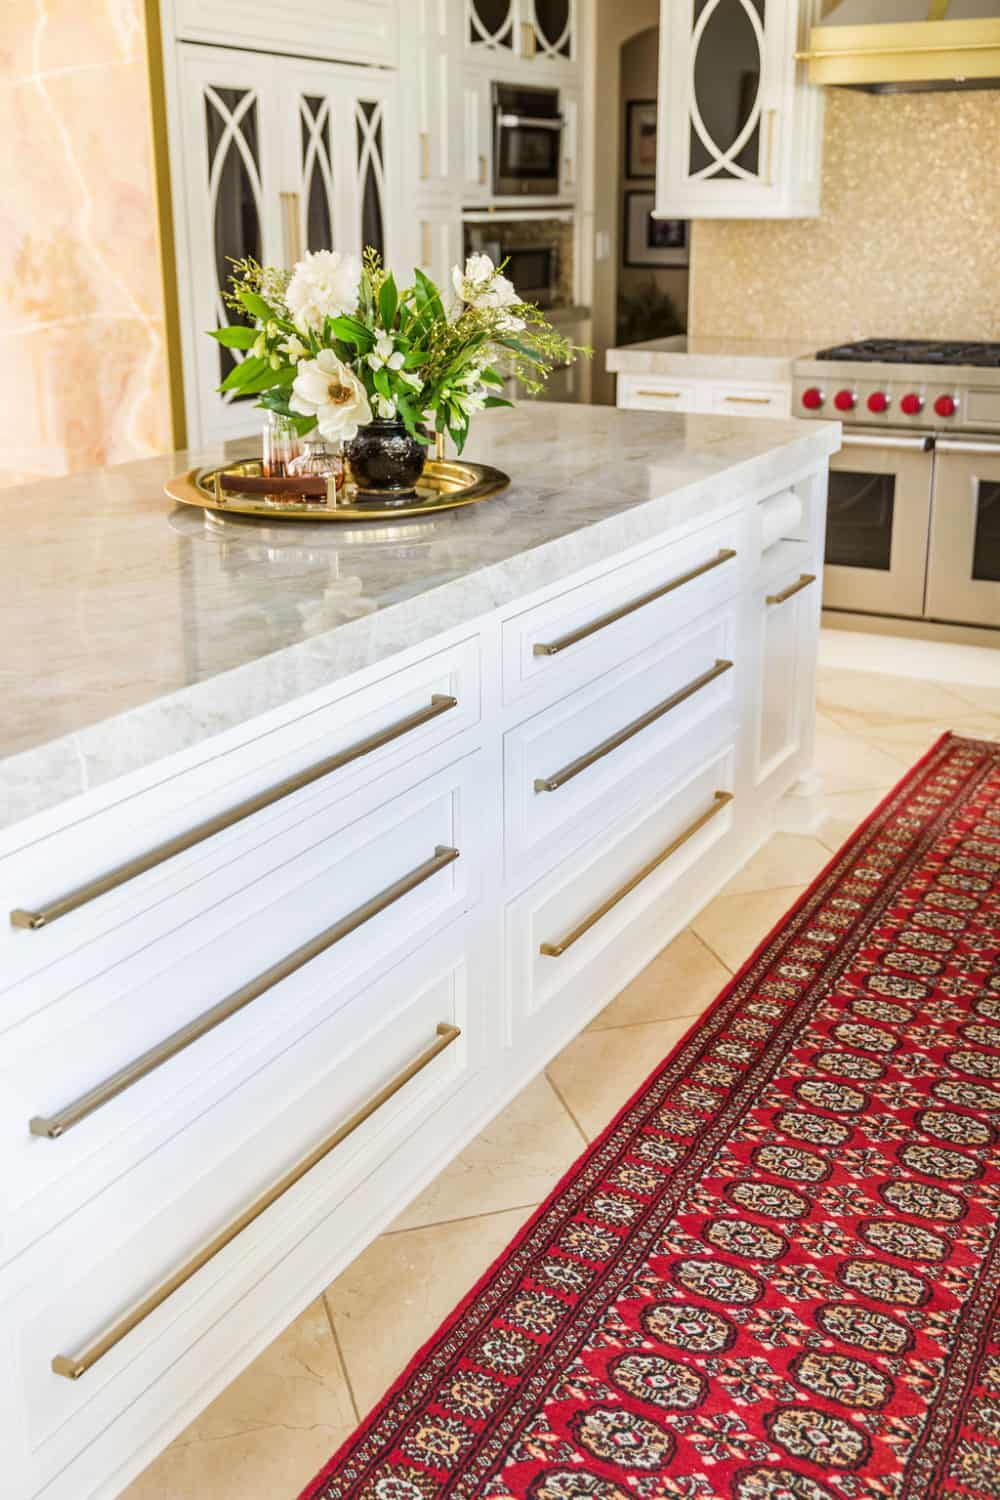 Nicholas Design Build | A remodeled white kitchen with a red rug on the floor.